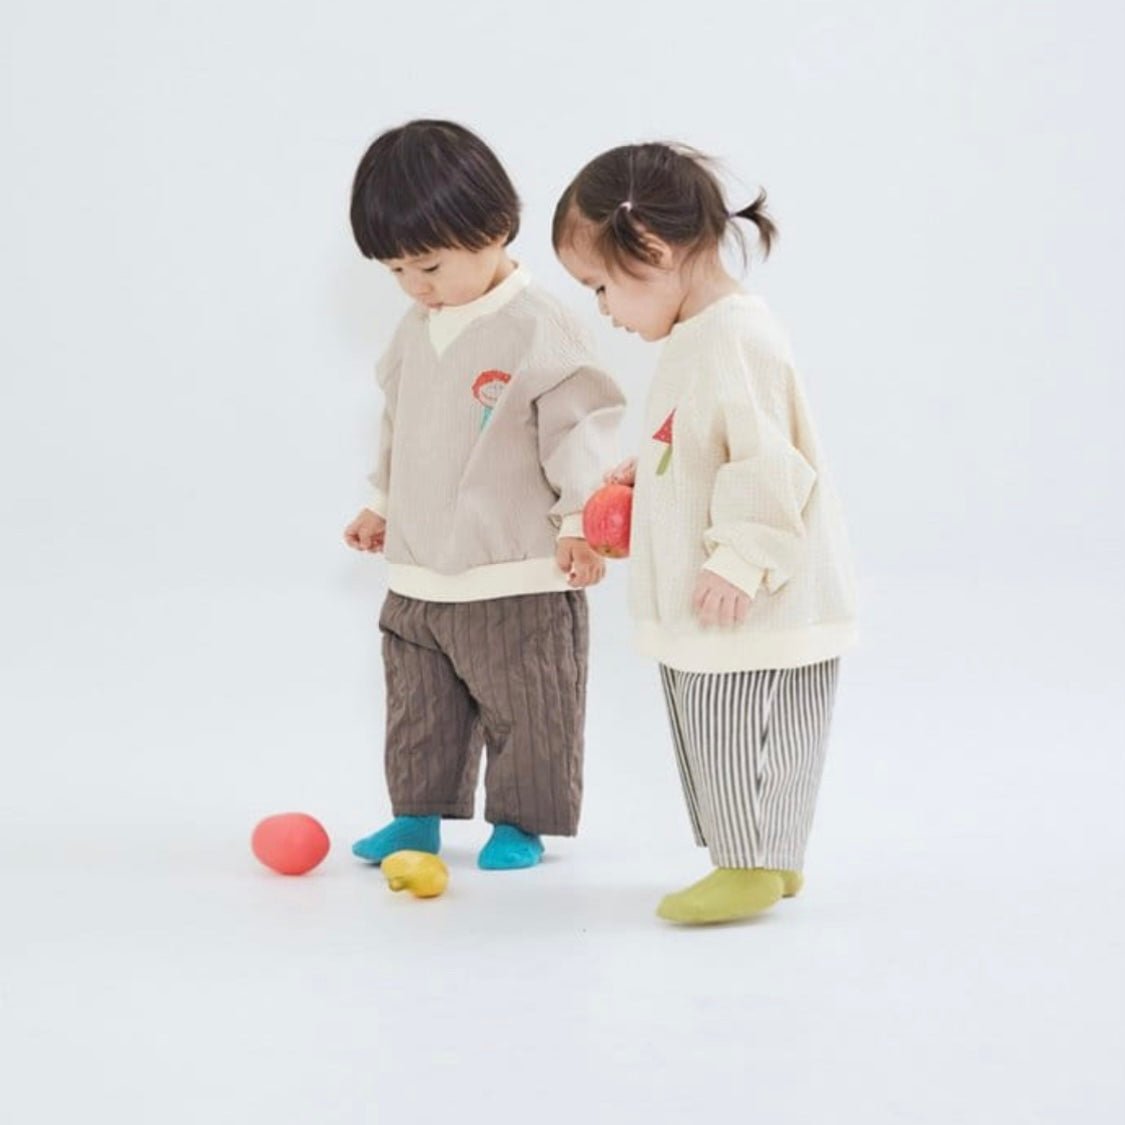 Cielo Pants find Stylish Fashion for Little People- at Little Foxx Concept Store